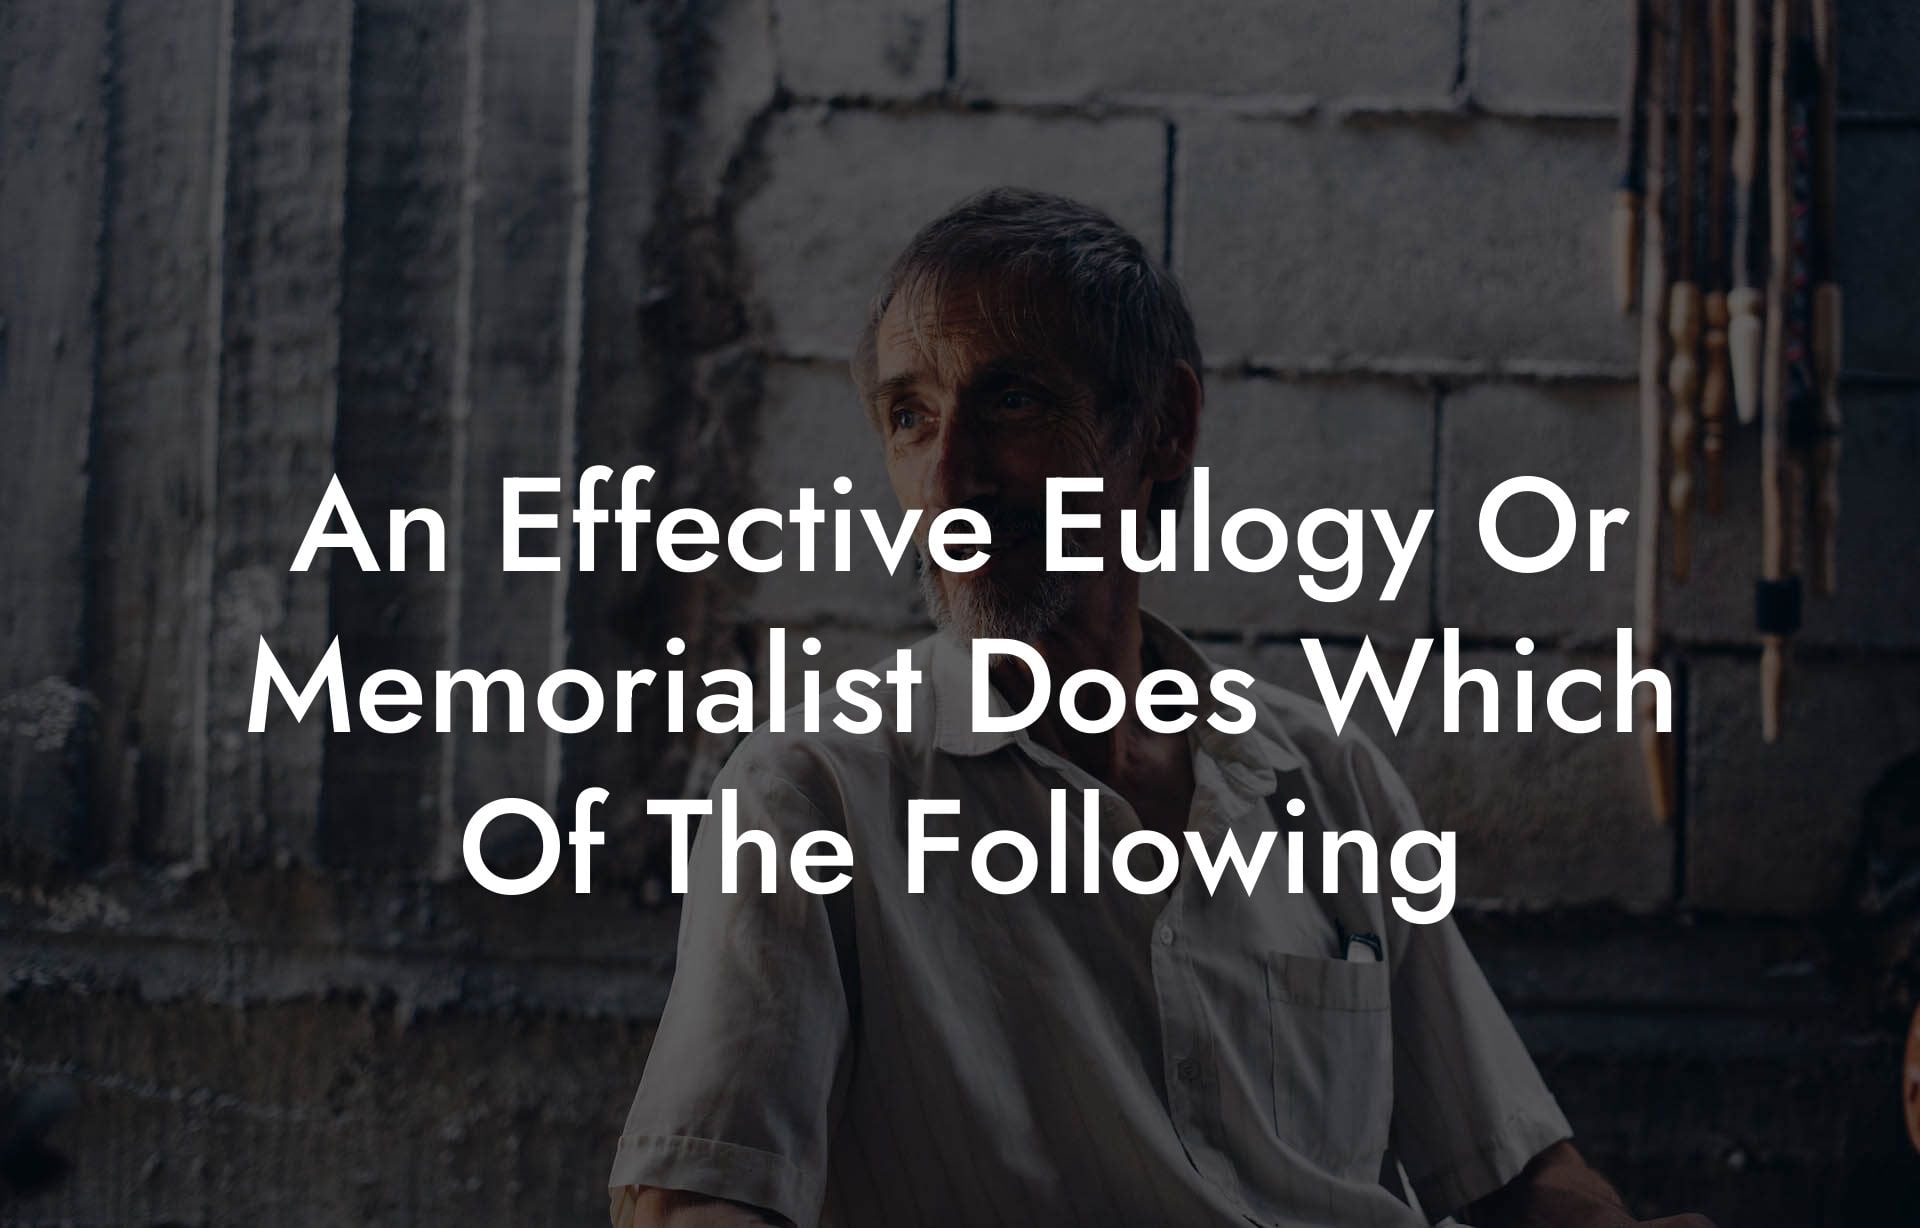 An Effective Eulogy Or Memorialist Does Which Of The Following